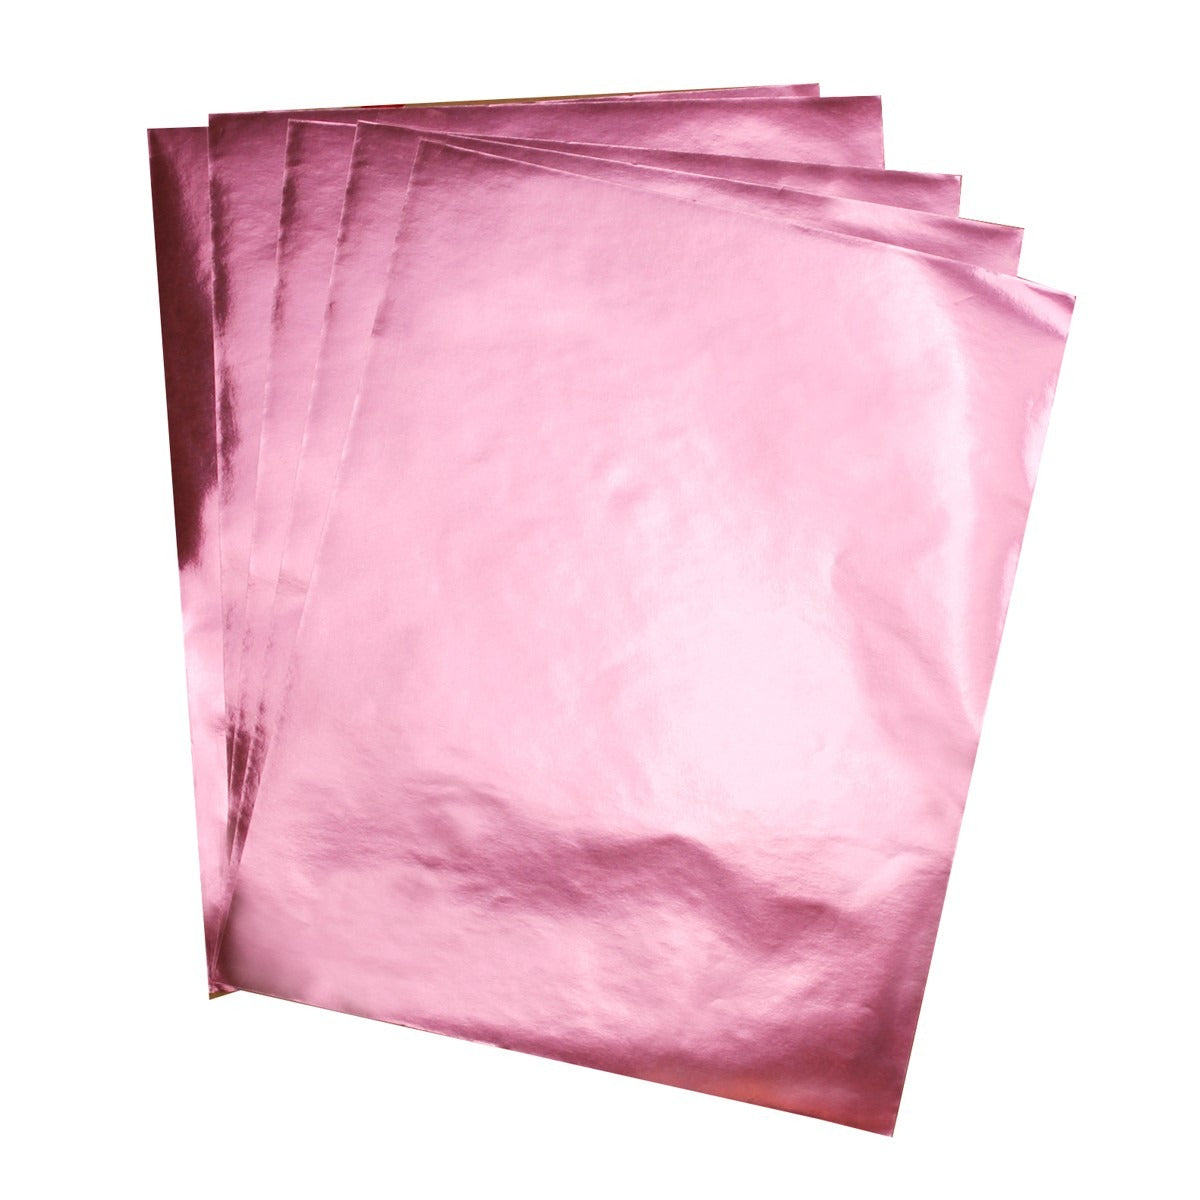 Precious Metals - Silver Metallic and Hot Pink Tissue - 400 Sheets/Ream